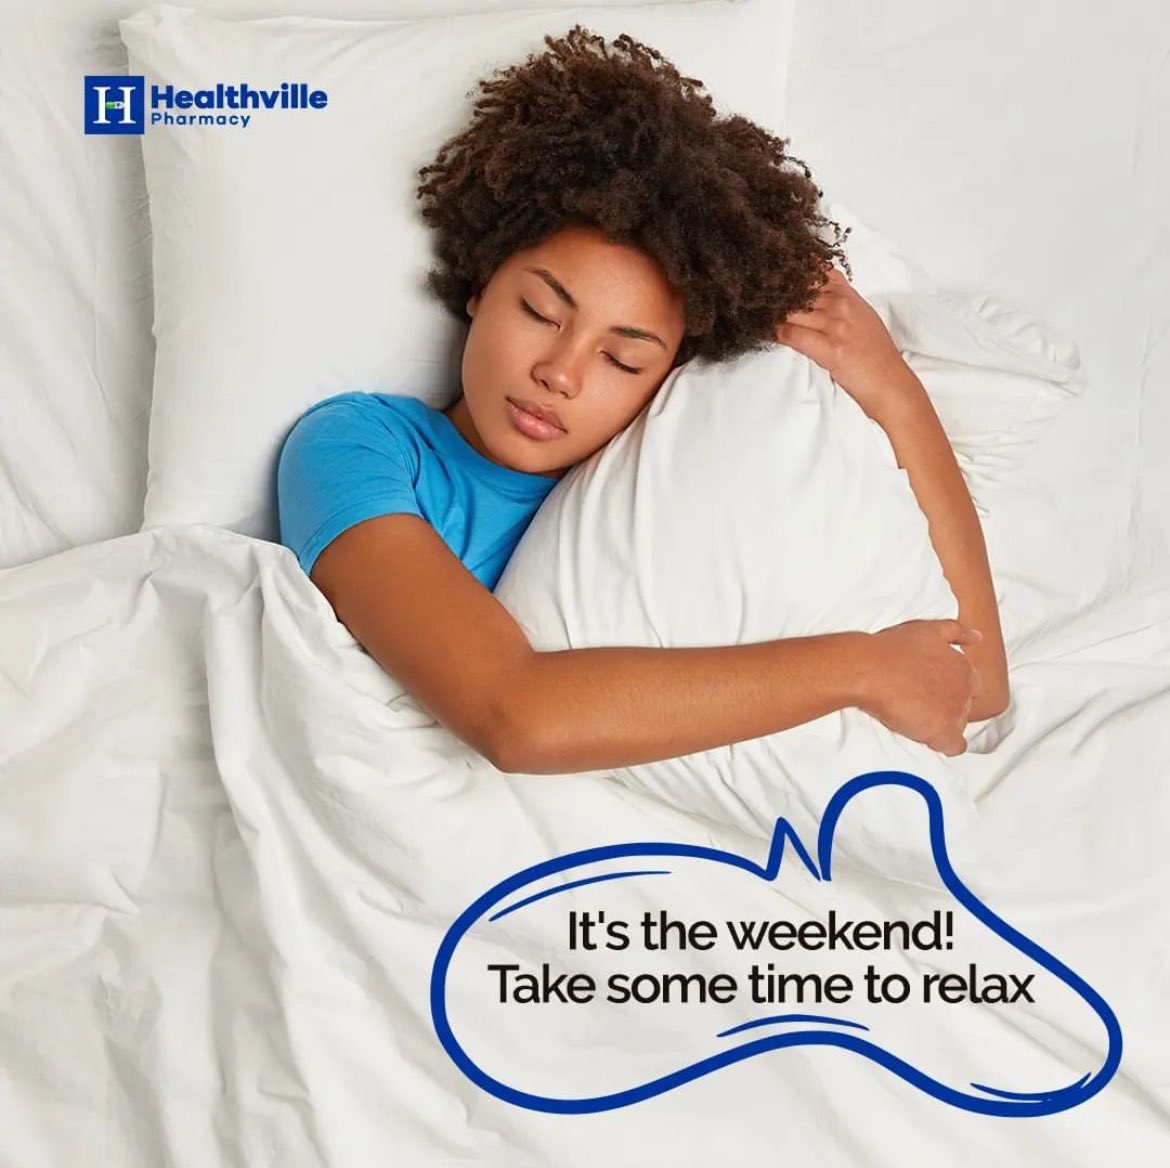 Weekend vibes: Time to unwind and recharge!

 Treat yourself to some well-deserved relaxation. Your health and happiness matter.

#Healthvillepharmacy #WeekendVibes #SelfCare #WeekendBreak #WeekendGoals #RelaxationTime 
#WeekendRelaxation #PharmacyServices